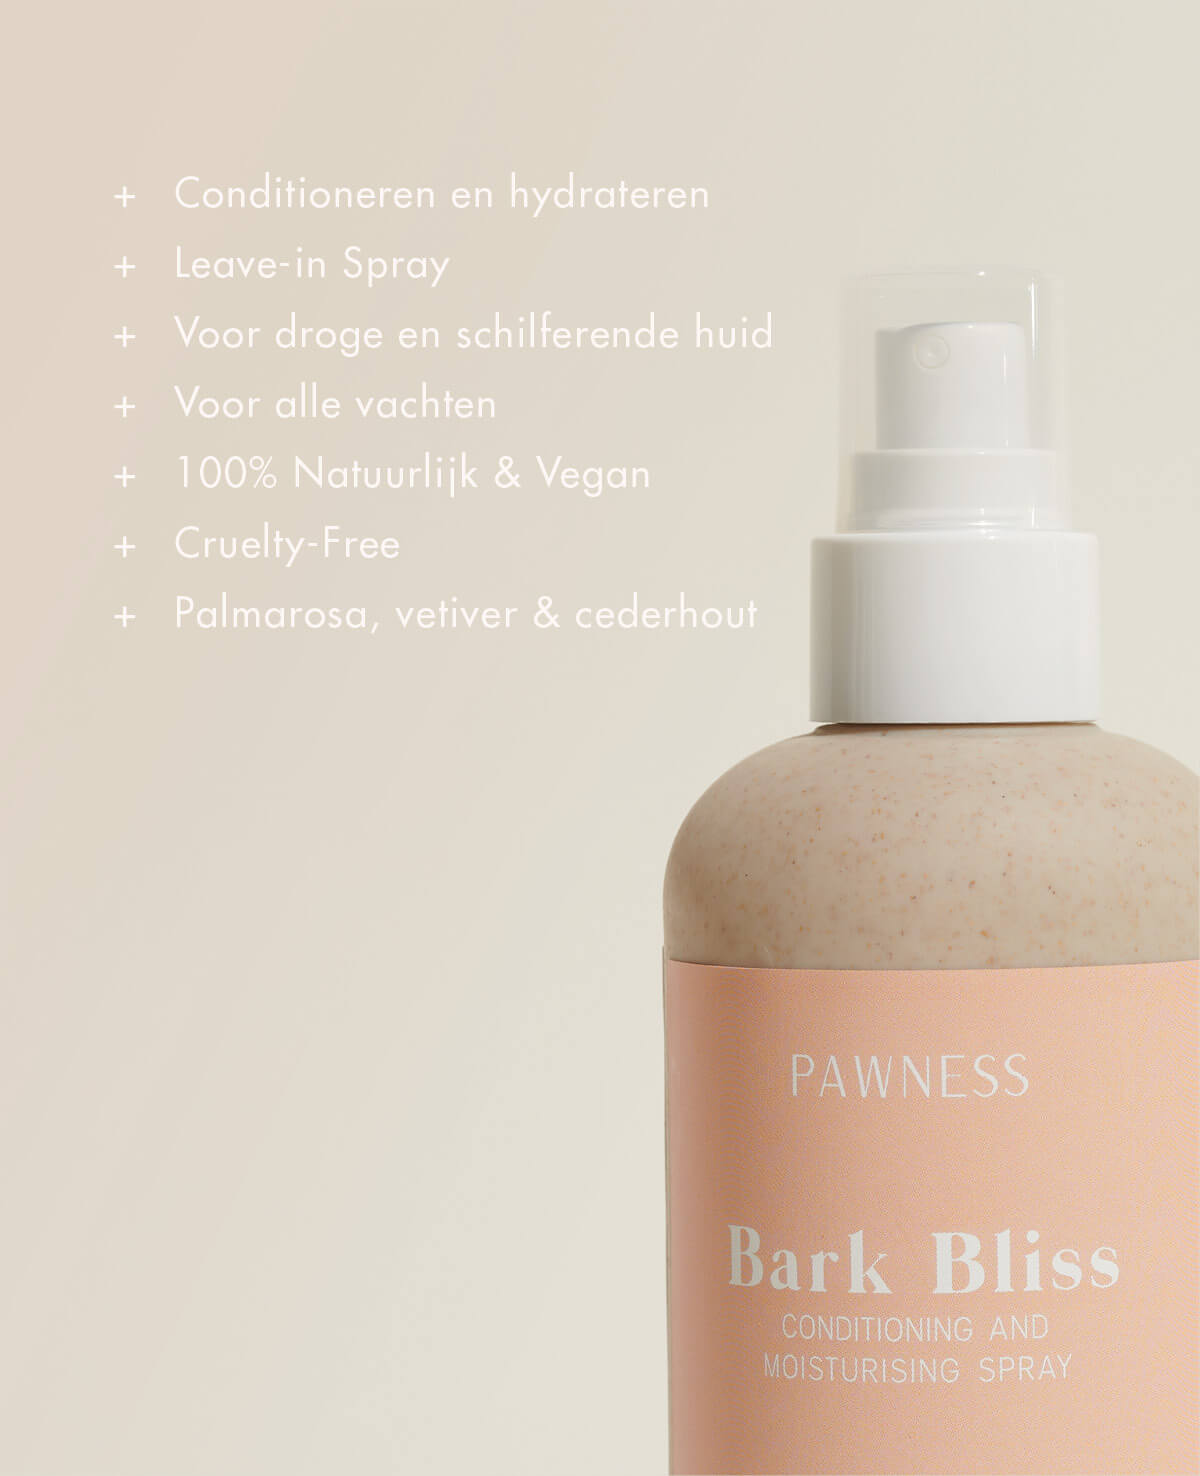 Fles Bliss Conditioner op witte achtergrond.